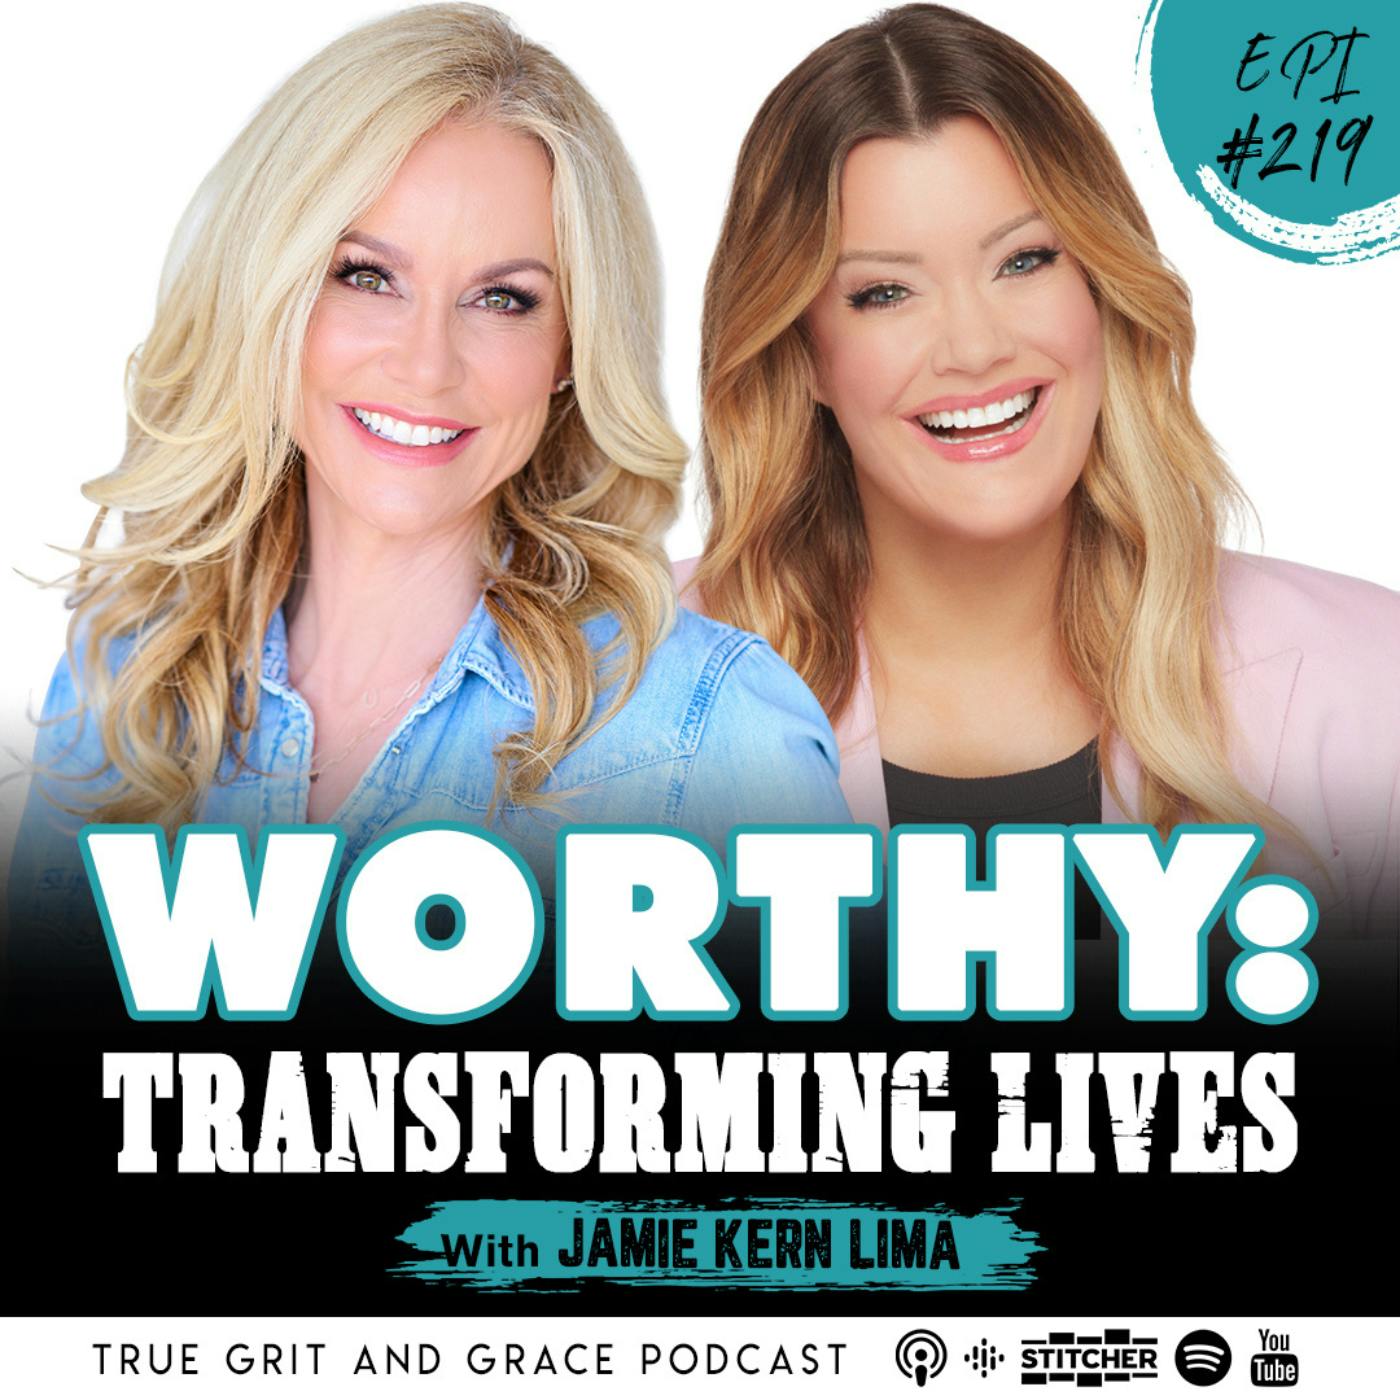 Worthy: Transforming Lives with Jamie Kern Lima